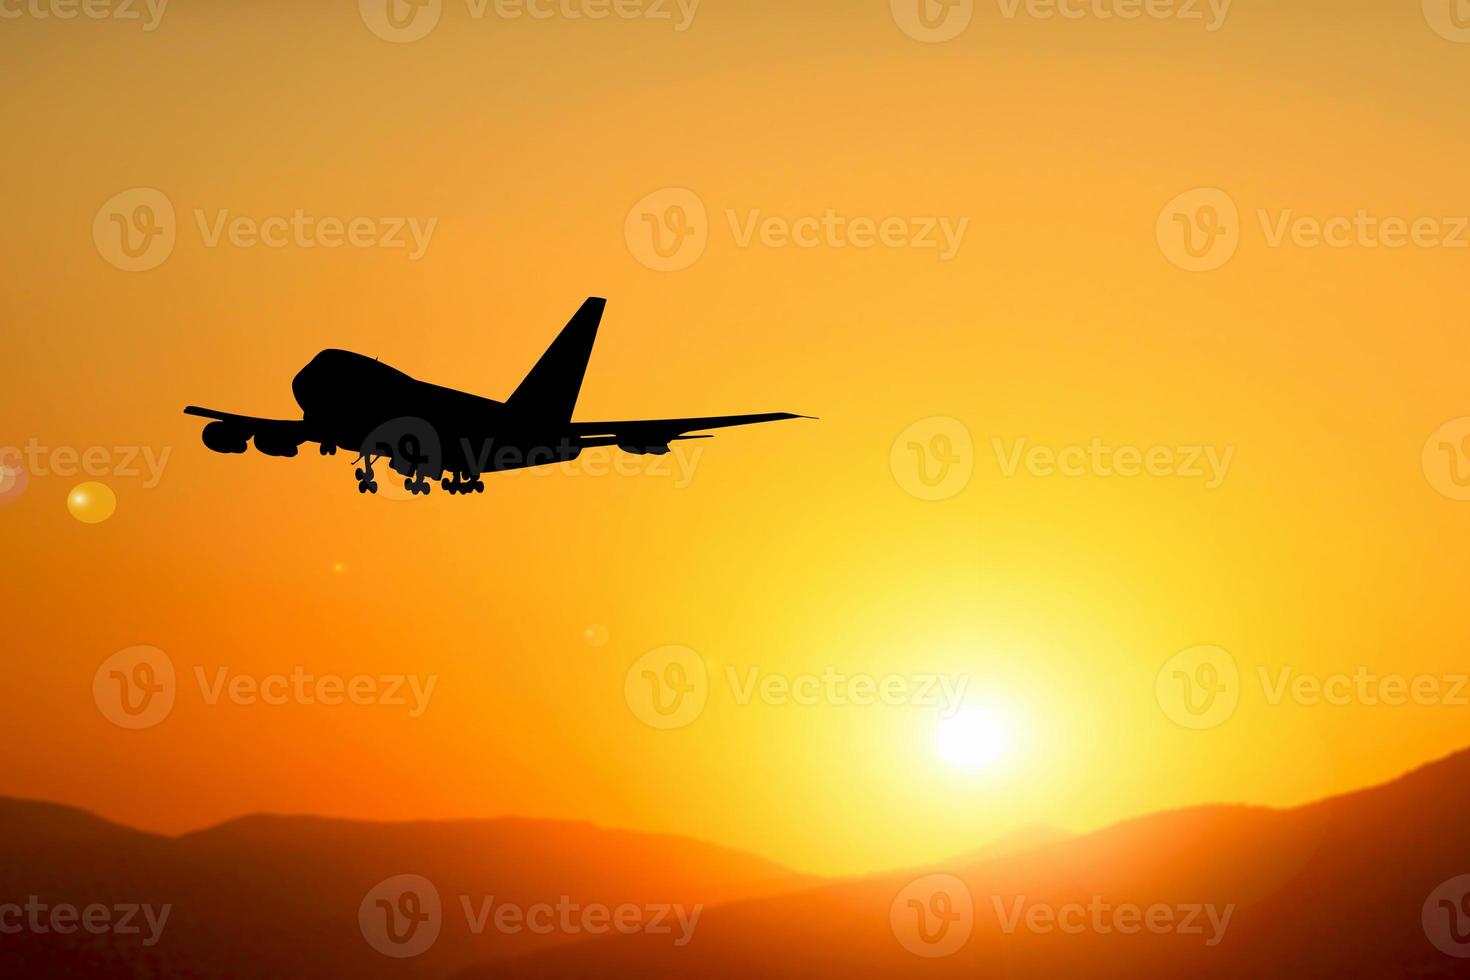 Passenger planes taking off from the airport. transportation and tourism concept photo